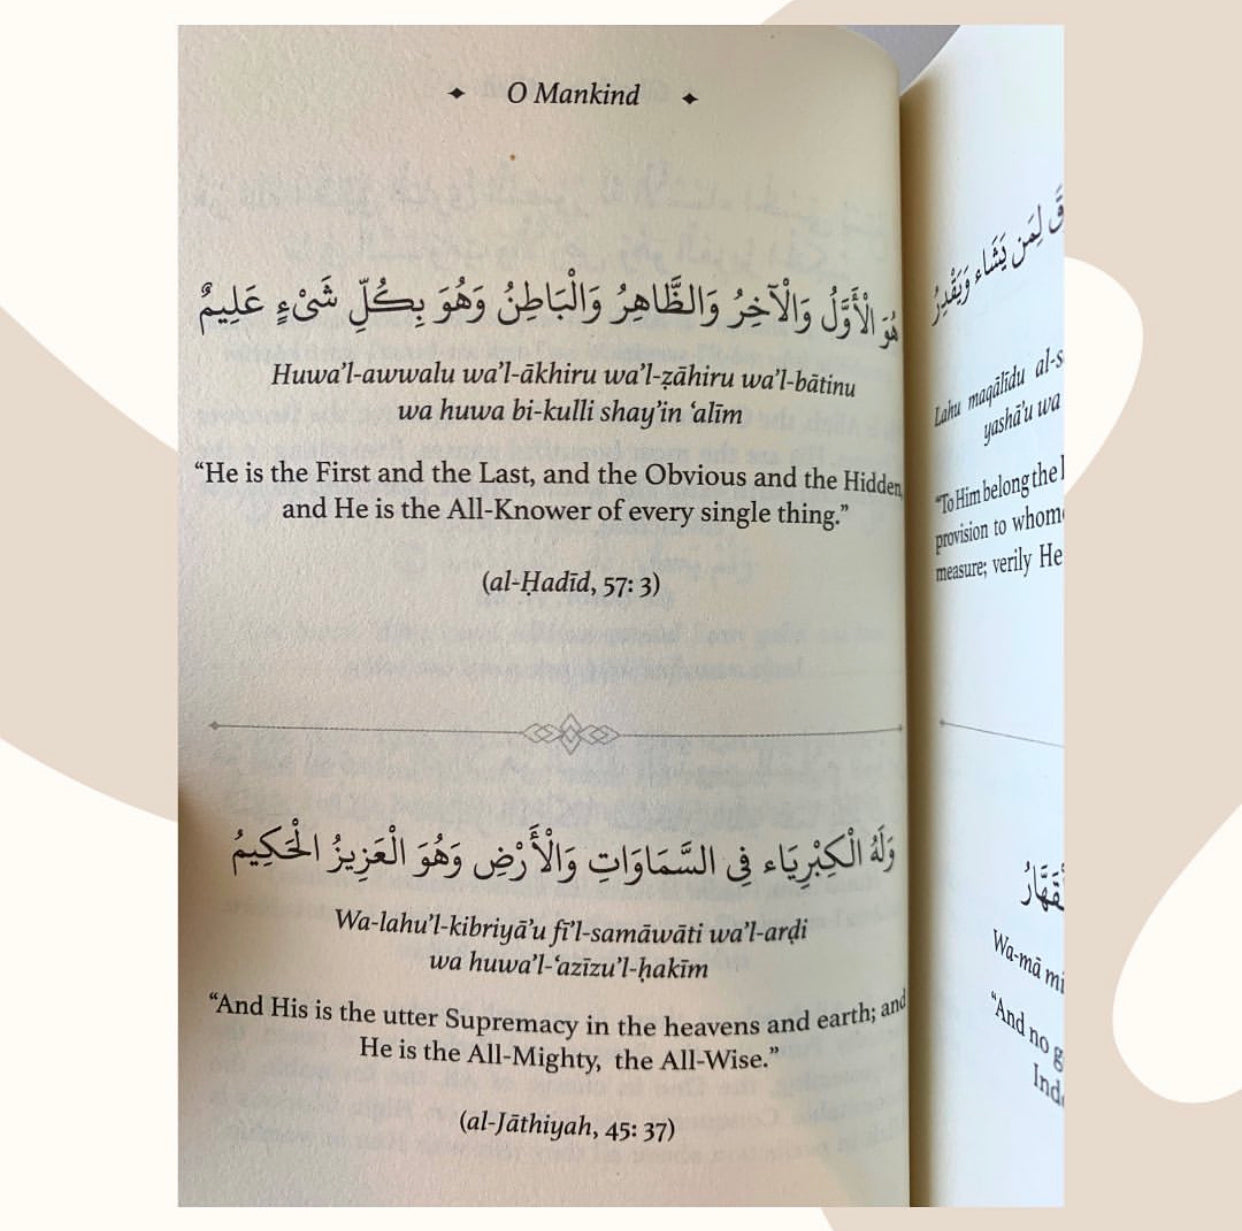 O mankind! A pocketful of gems from the Quran